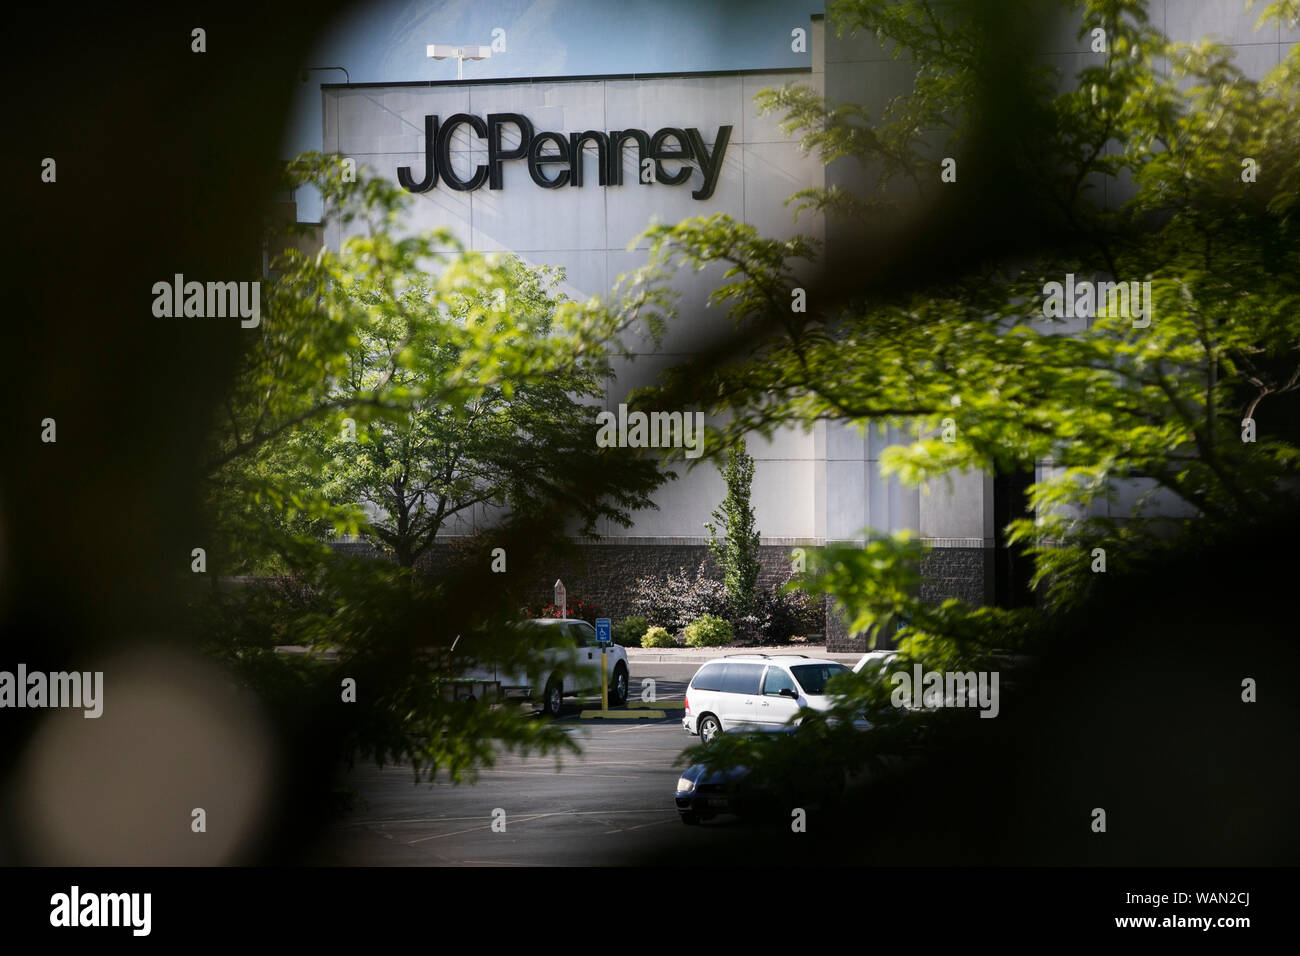 A logo sign outside of a JC Penney retail store location in Provo, Utah on July 29, 2019. Stock Photo